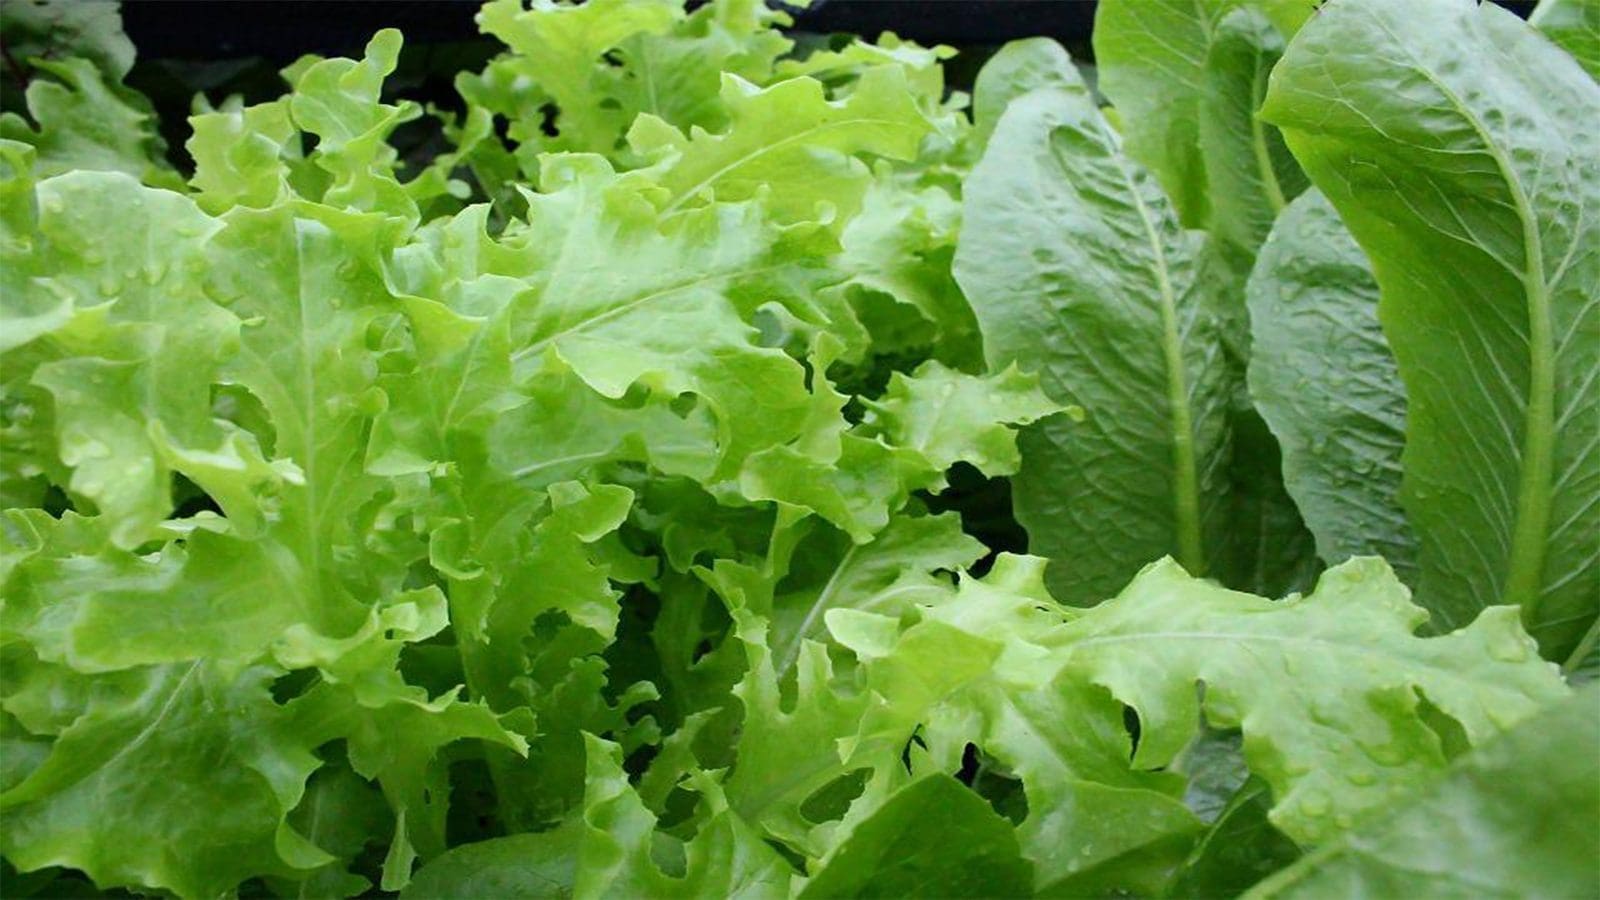 Spanish researchers uncover bacterial contamination in organic leafy greens